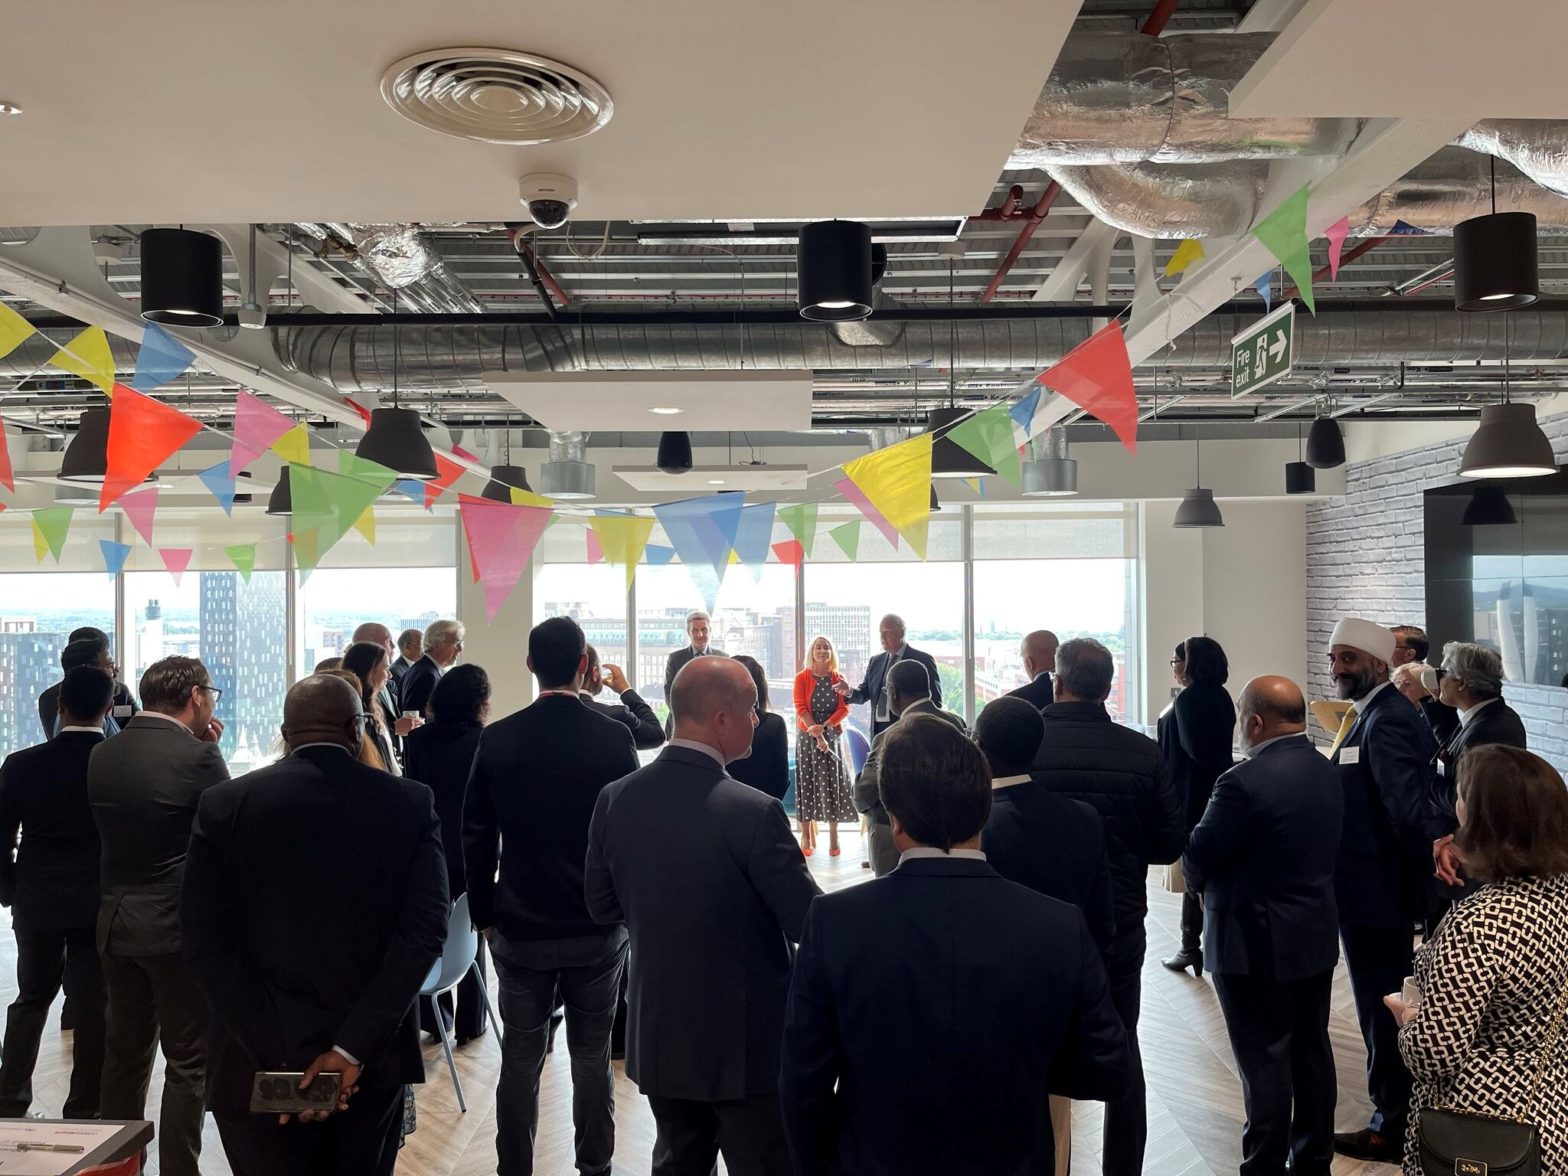 CWEIC and Irwin Mitchell host Breakfast Reception to celebrate the opening of the Commonwealth Games